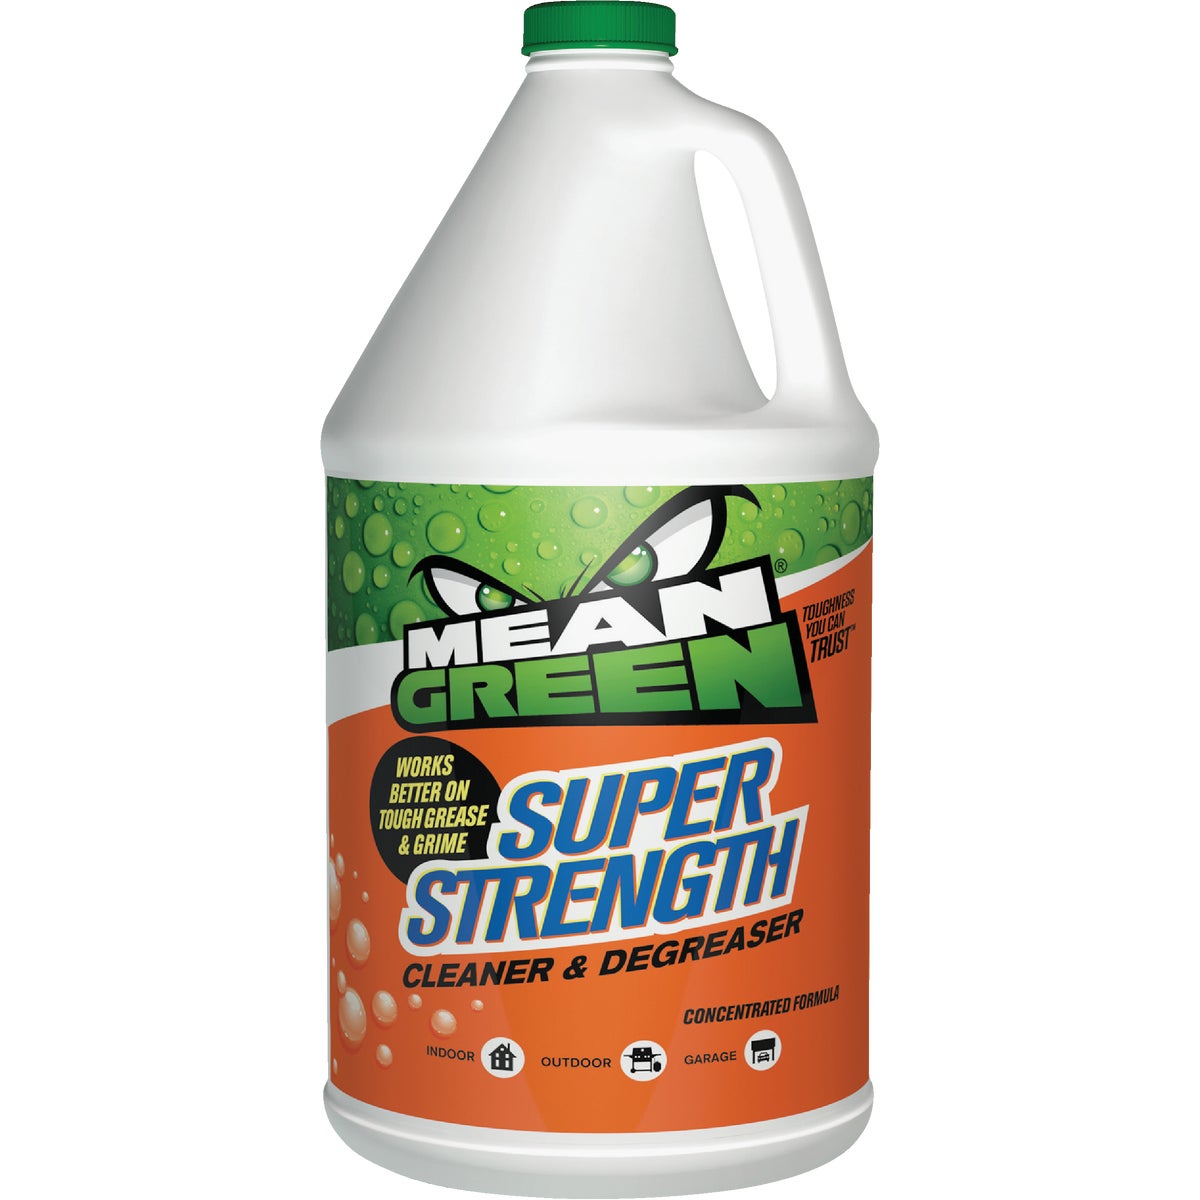 Mean Green 1 Gal. Super Strength Cleaner & Degreaser